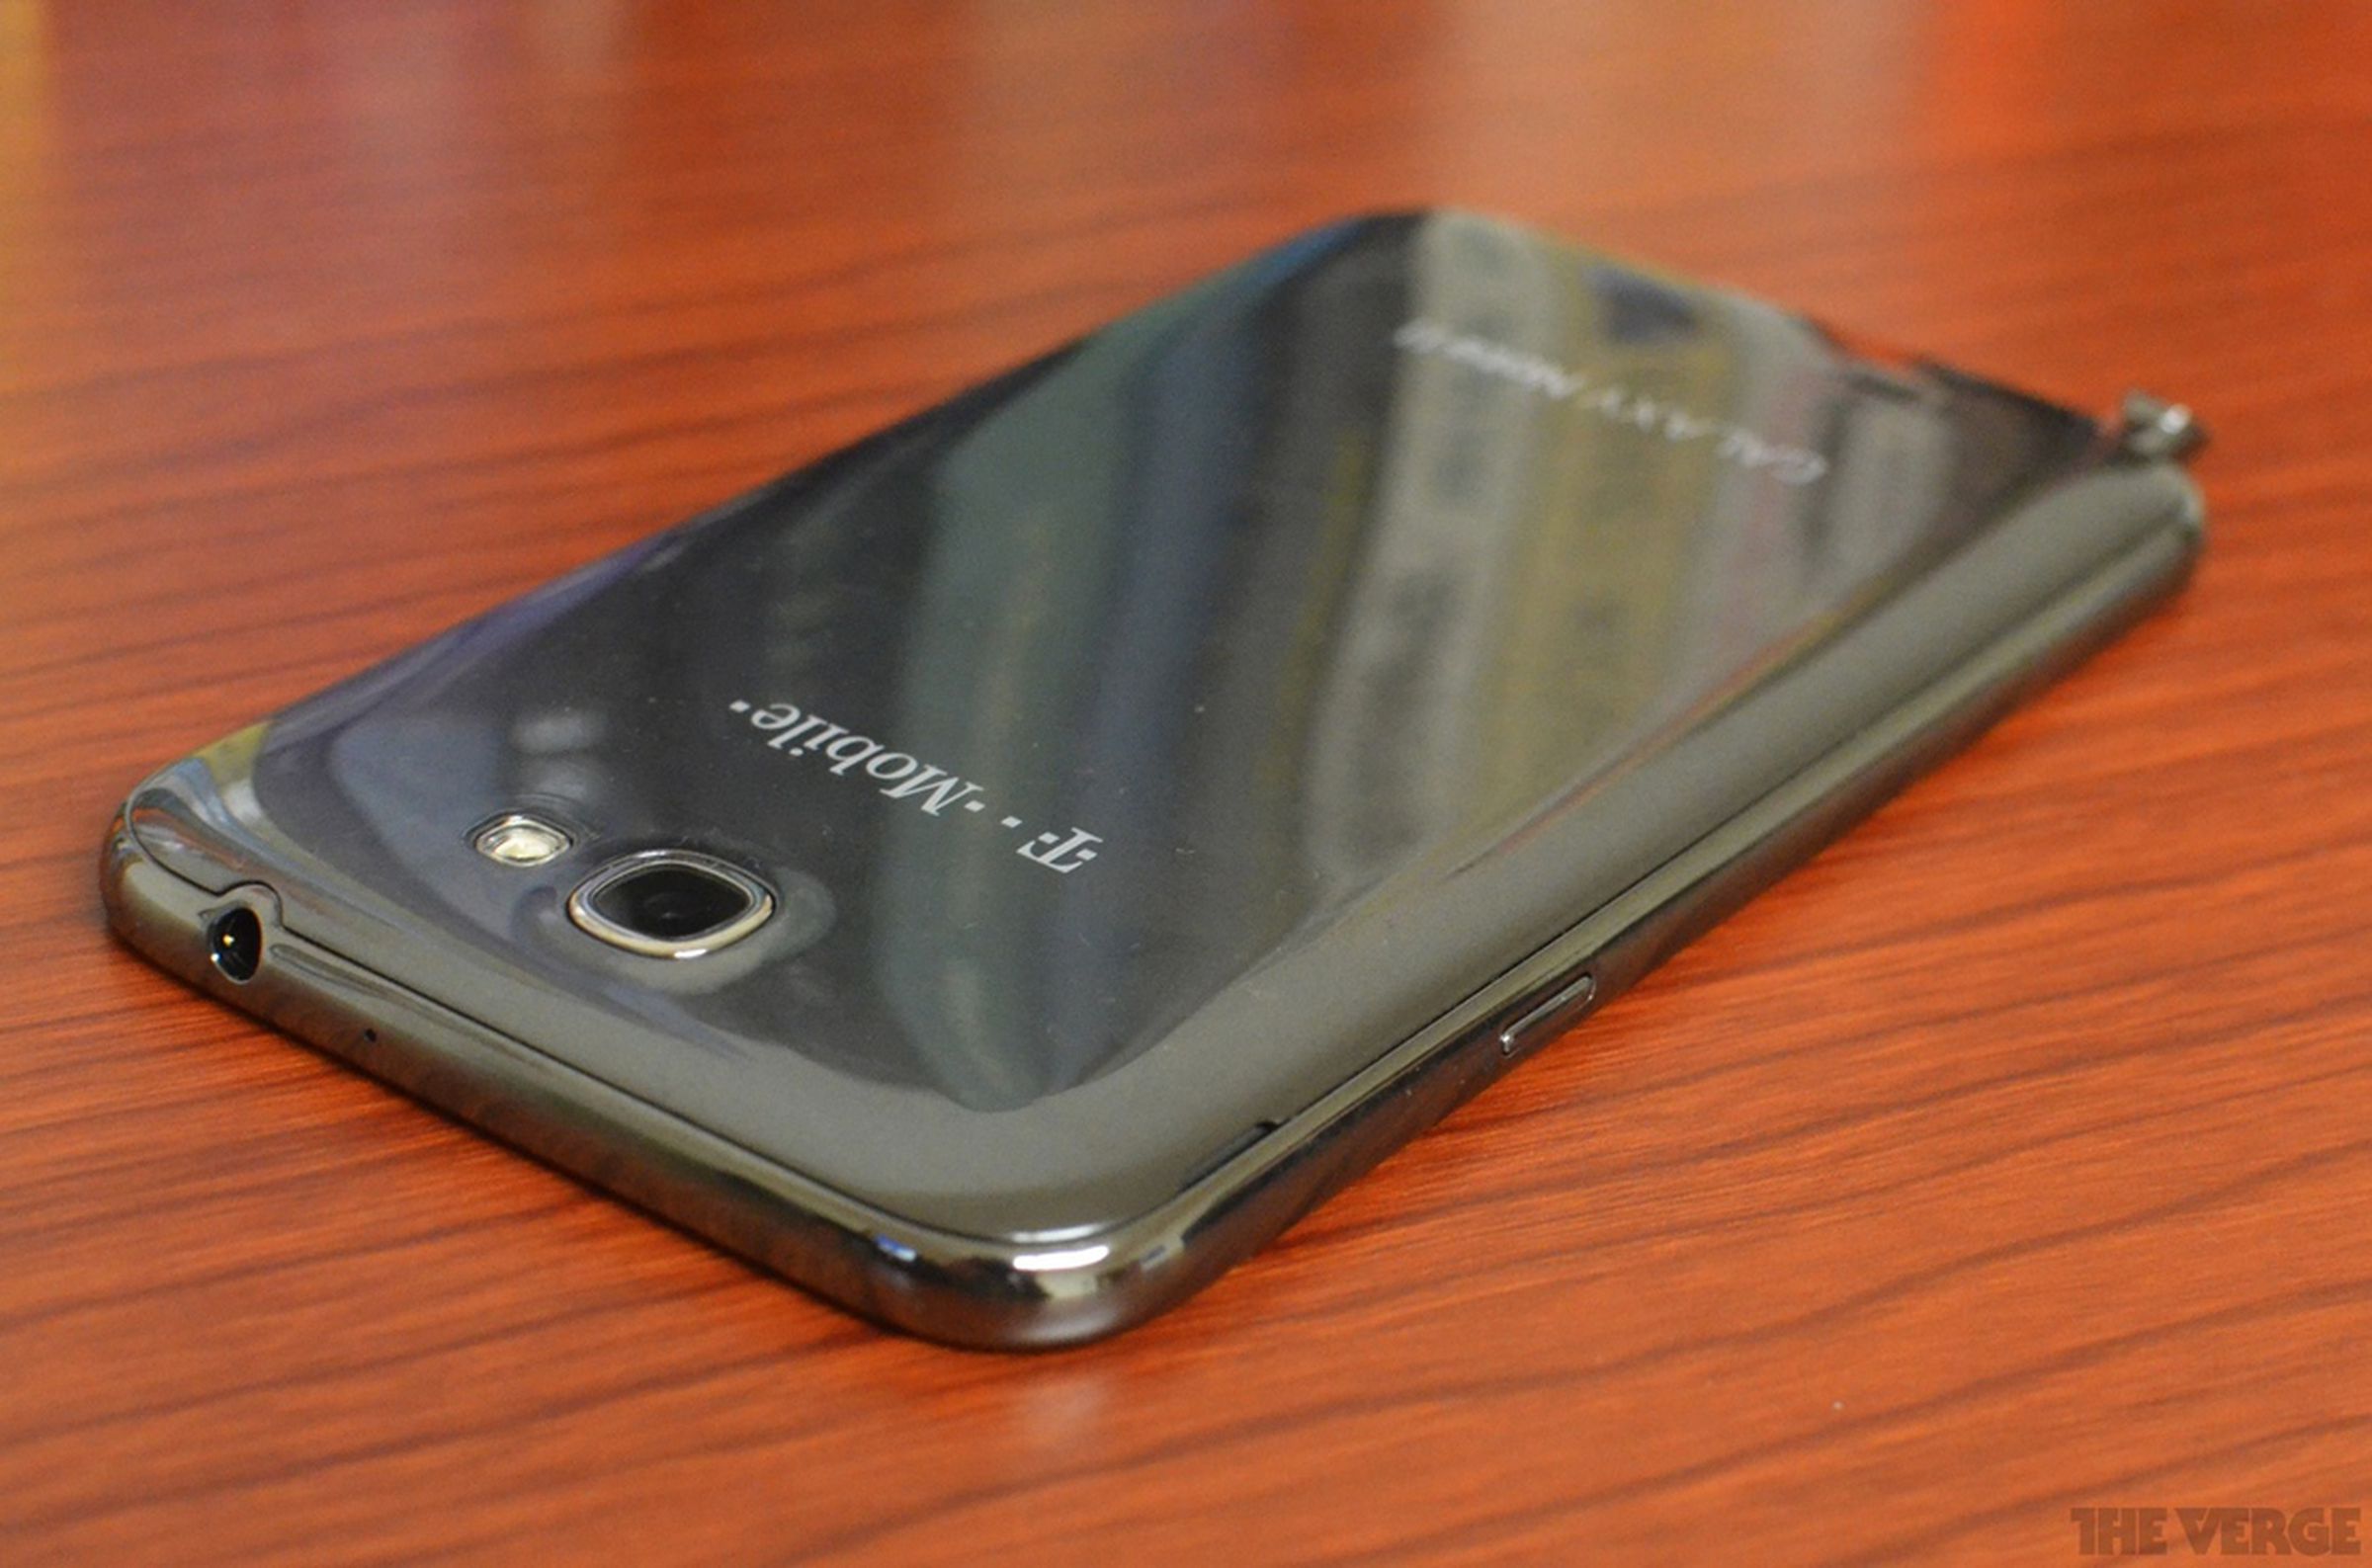 T-Mobile Galaxy Note II photos